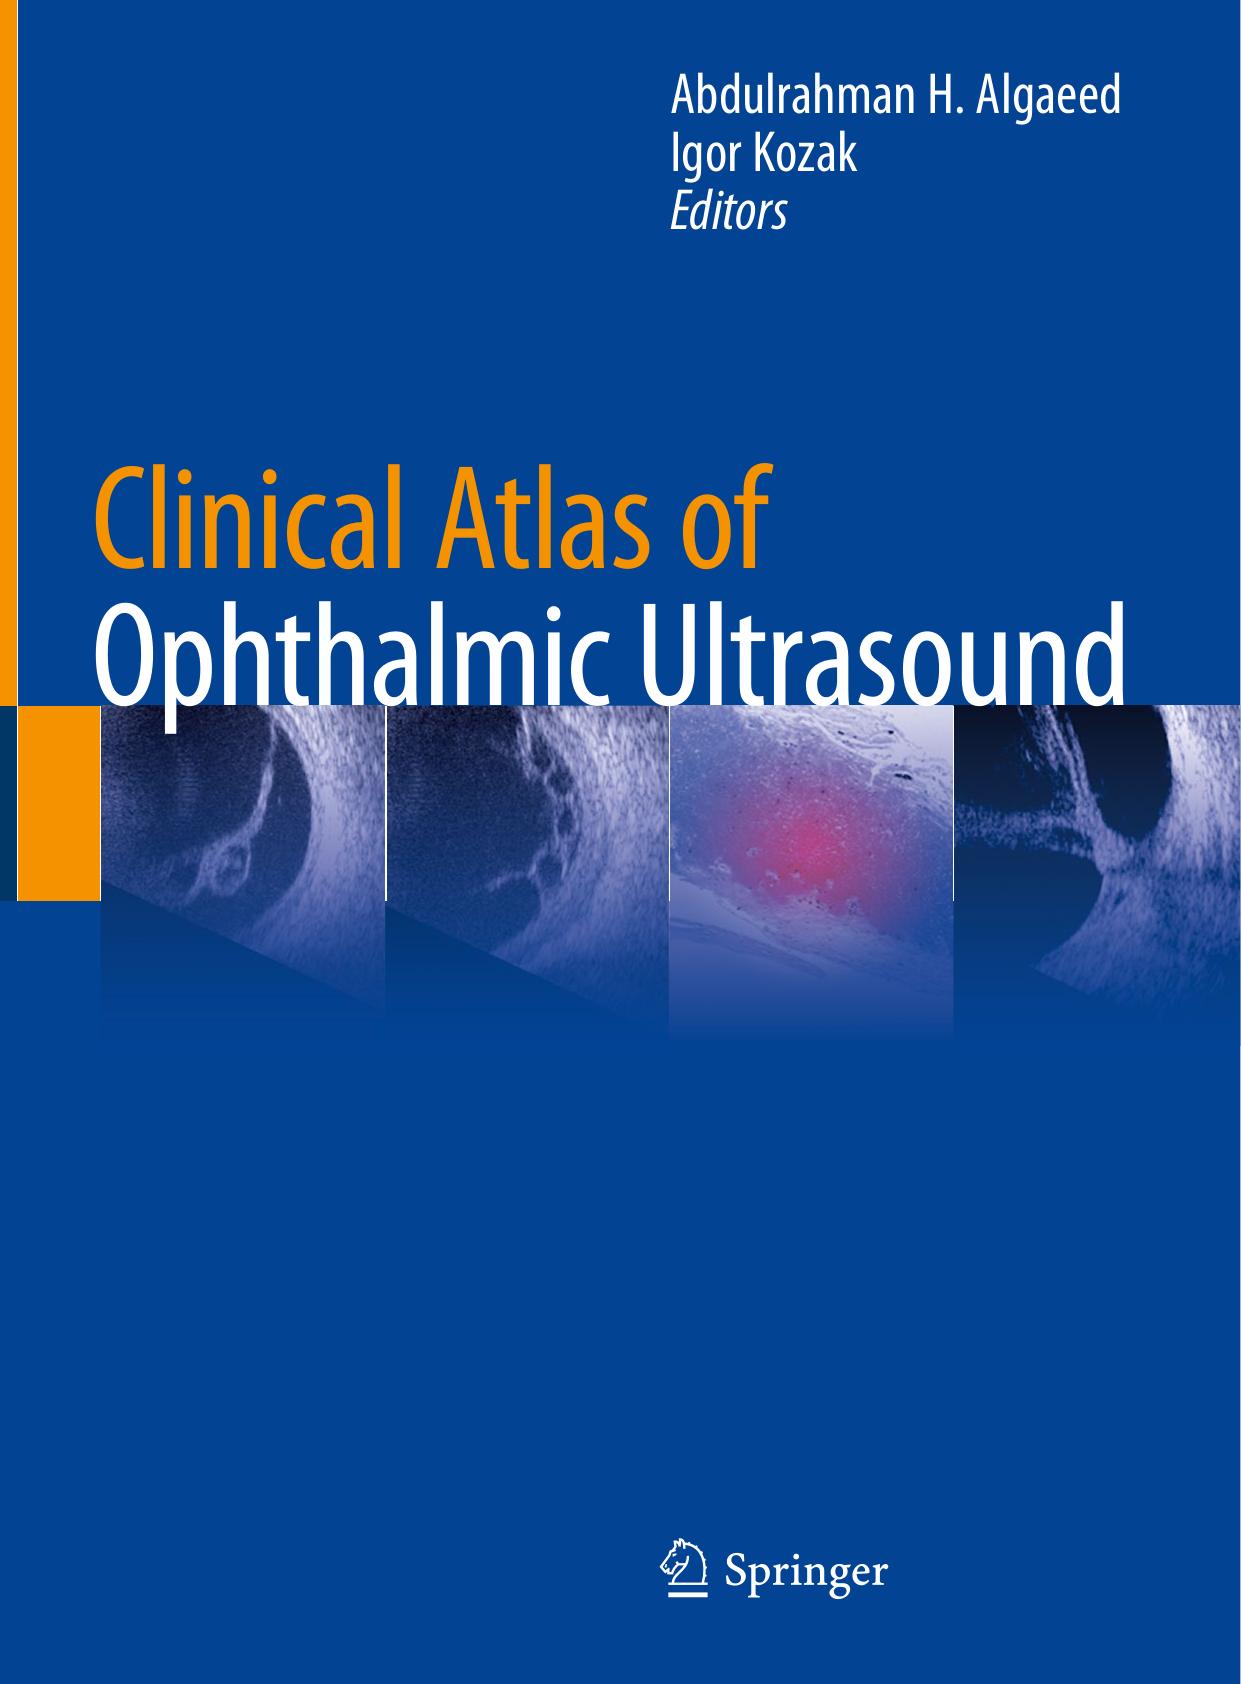 Clinical Atlas of Ophthalmic Ultrasound, 2019